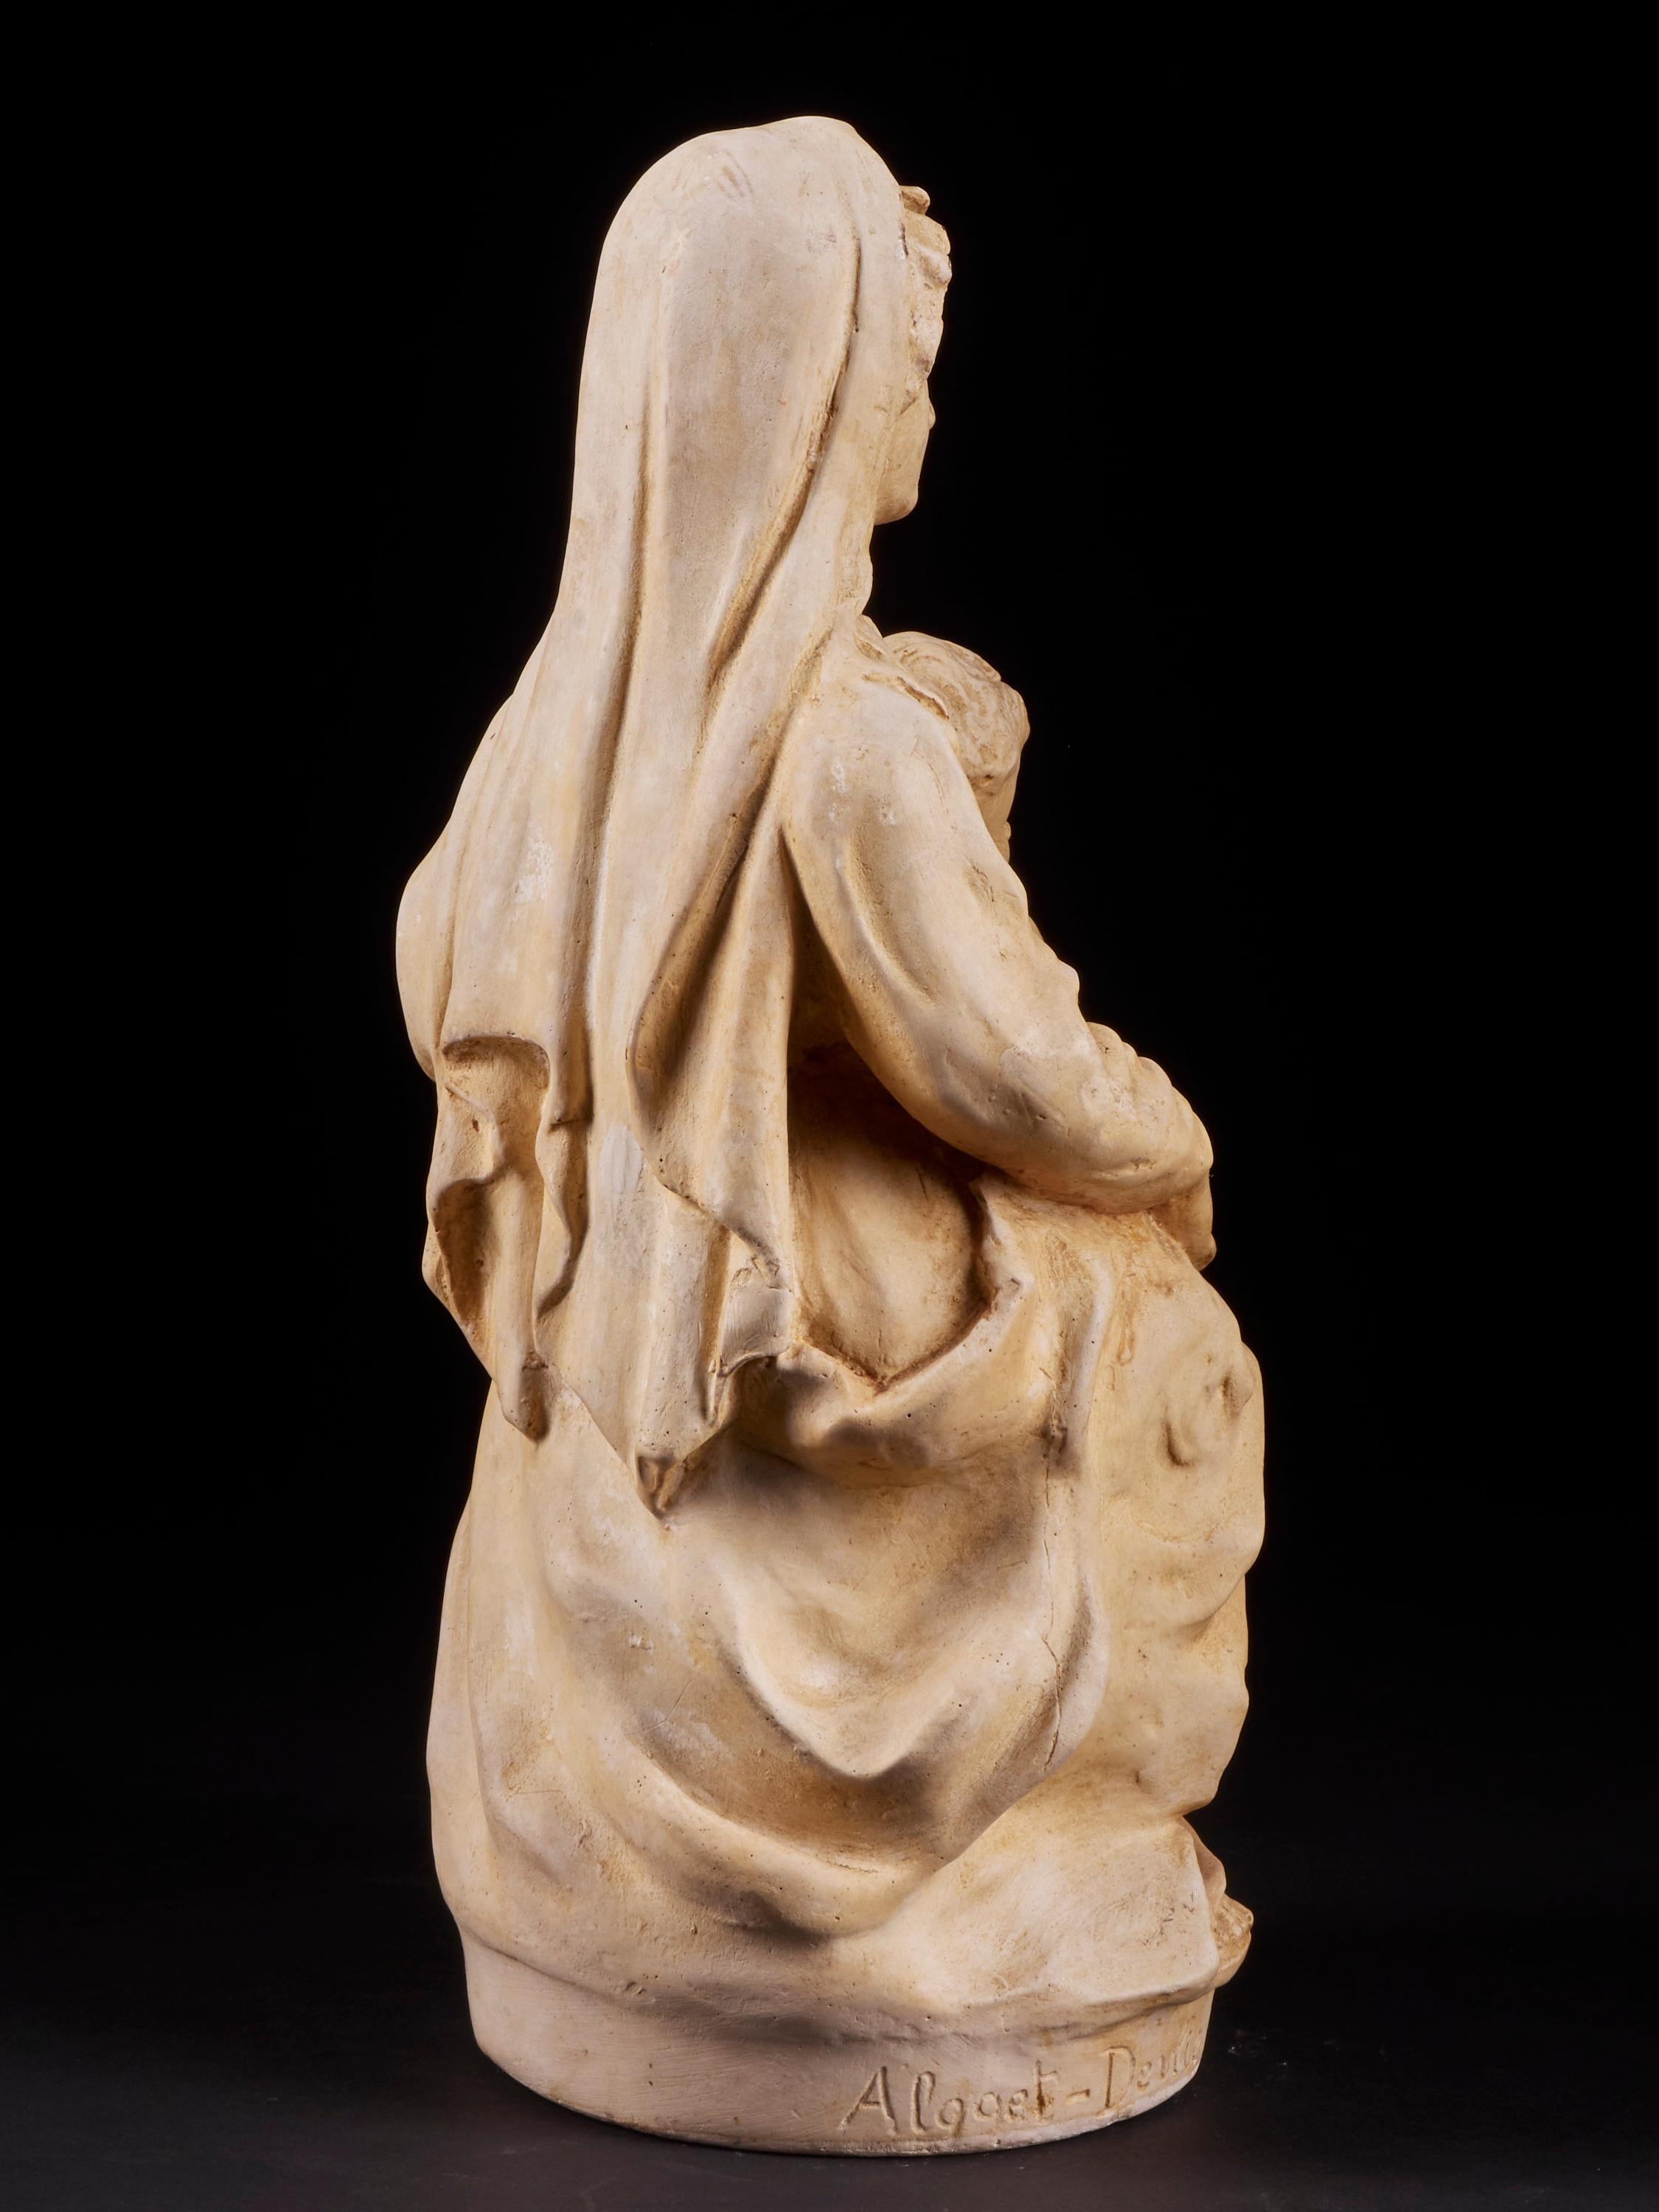 19th Century Mary and Child Plaster Statue Signed and Marked Algget, Devliegher from Bruges